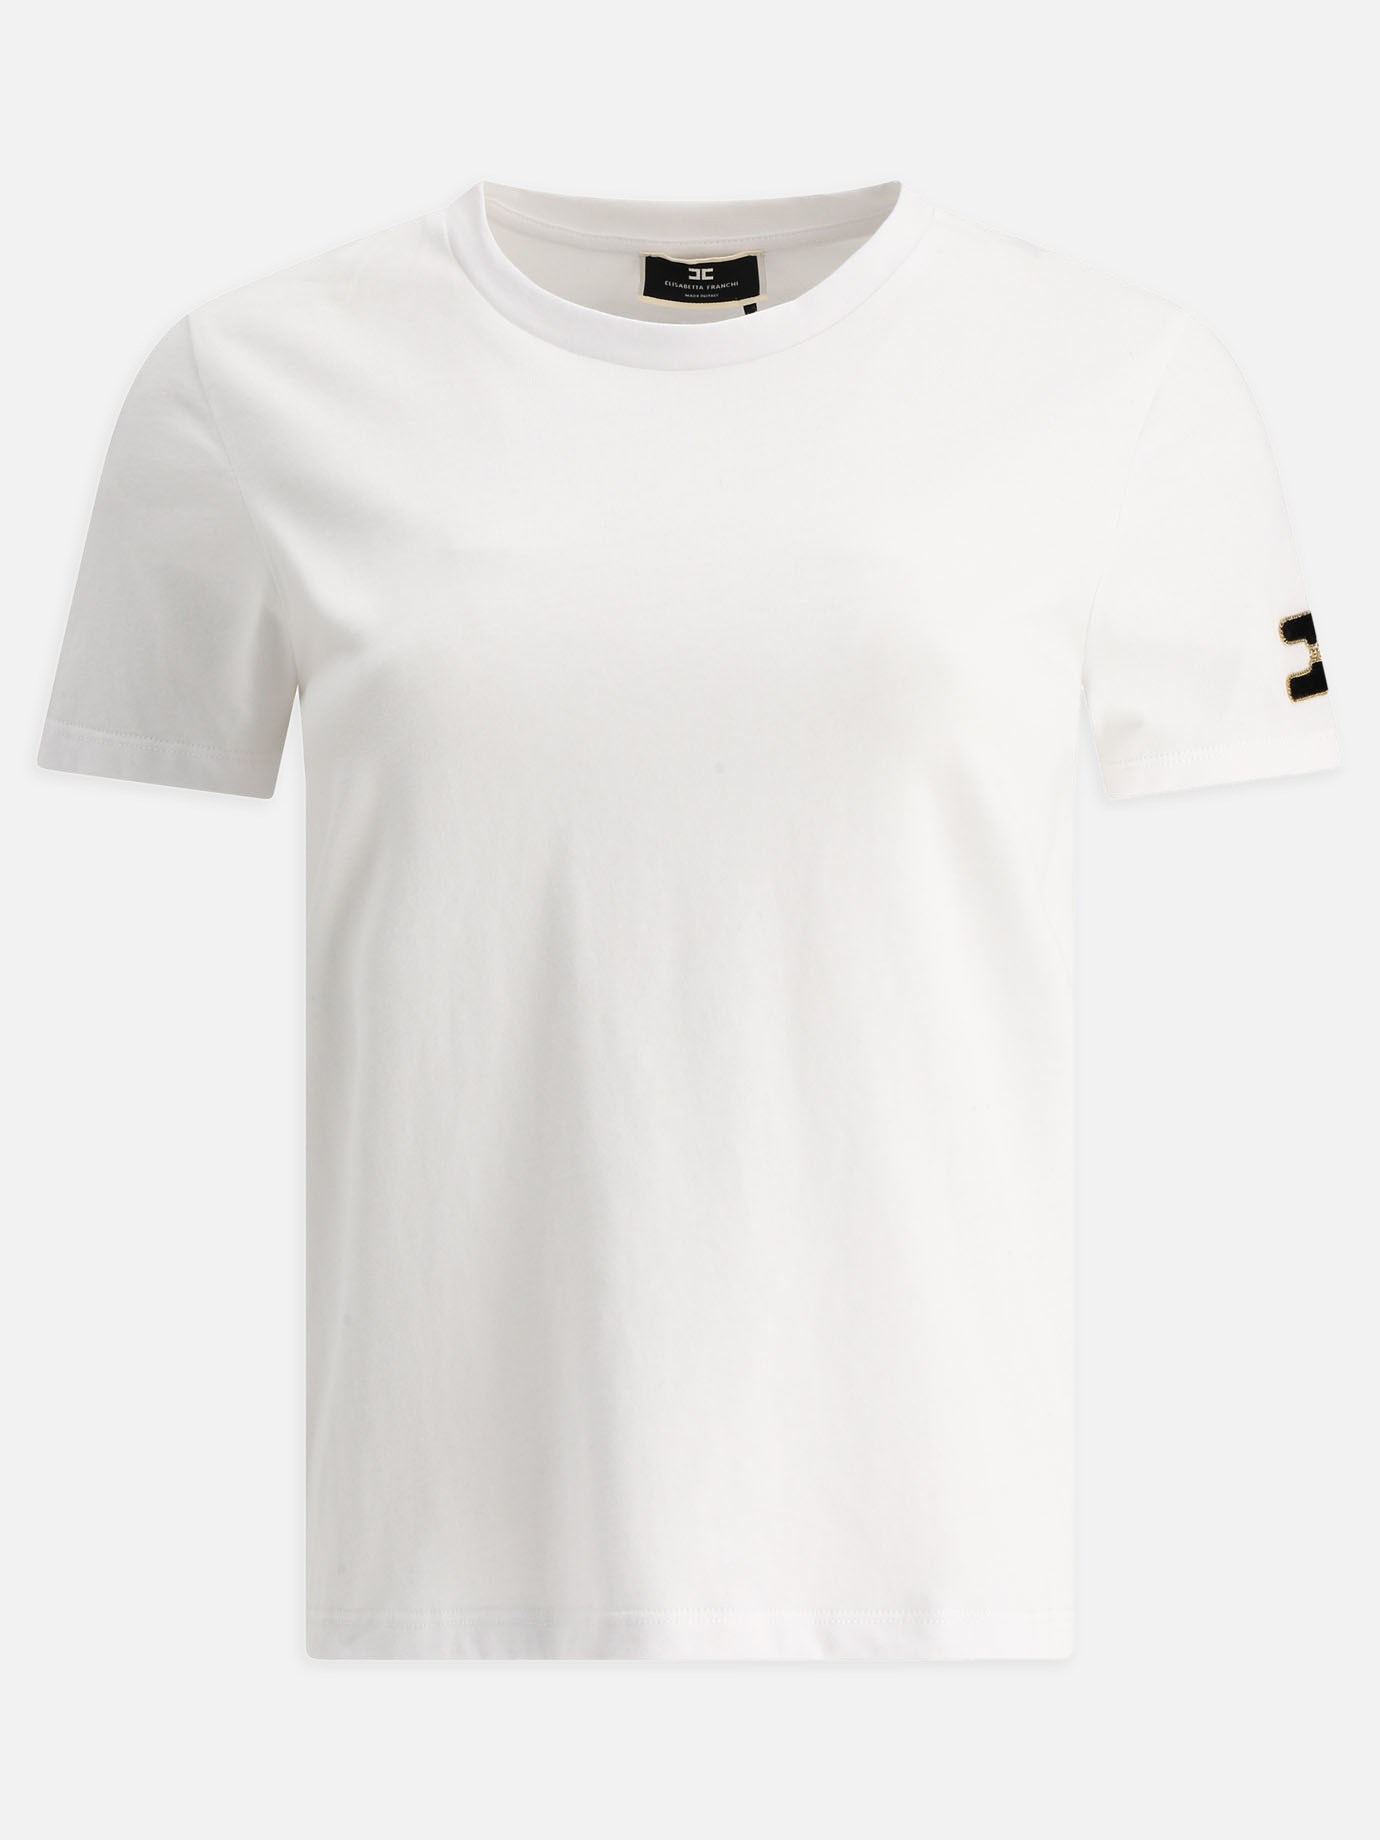 T-shirt with embroideryby Elisabetta Franchi - 1